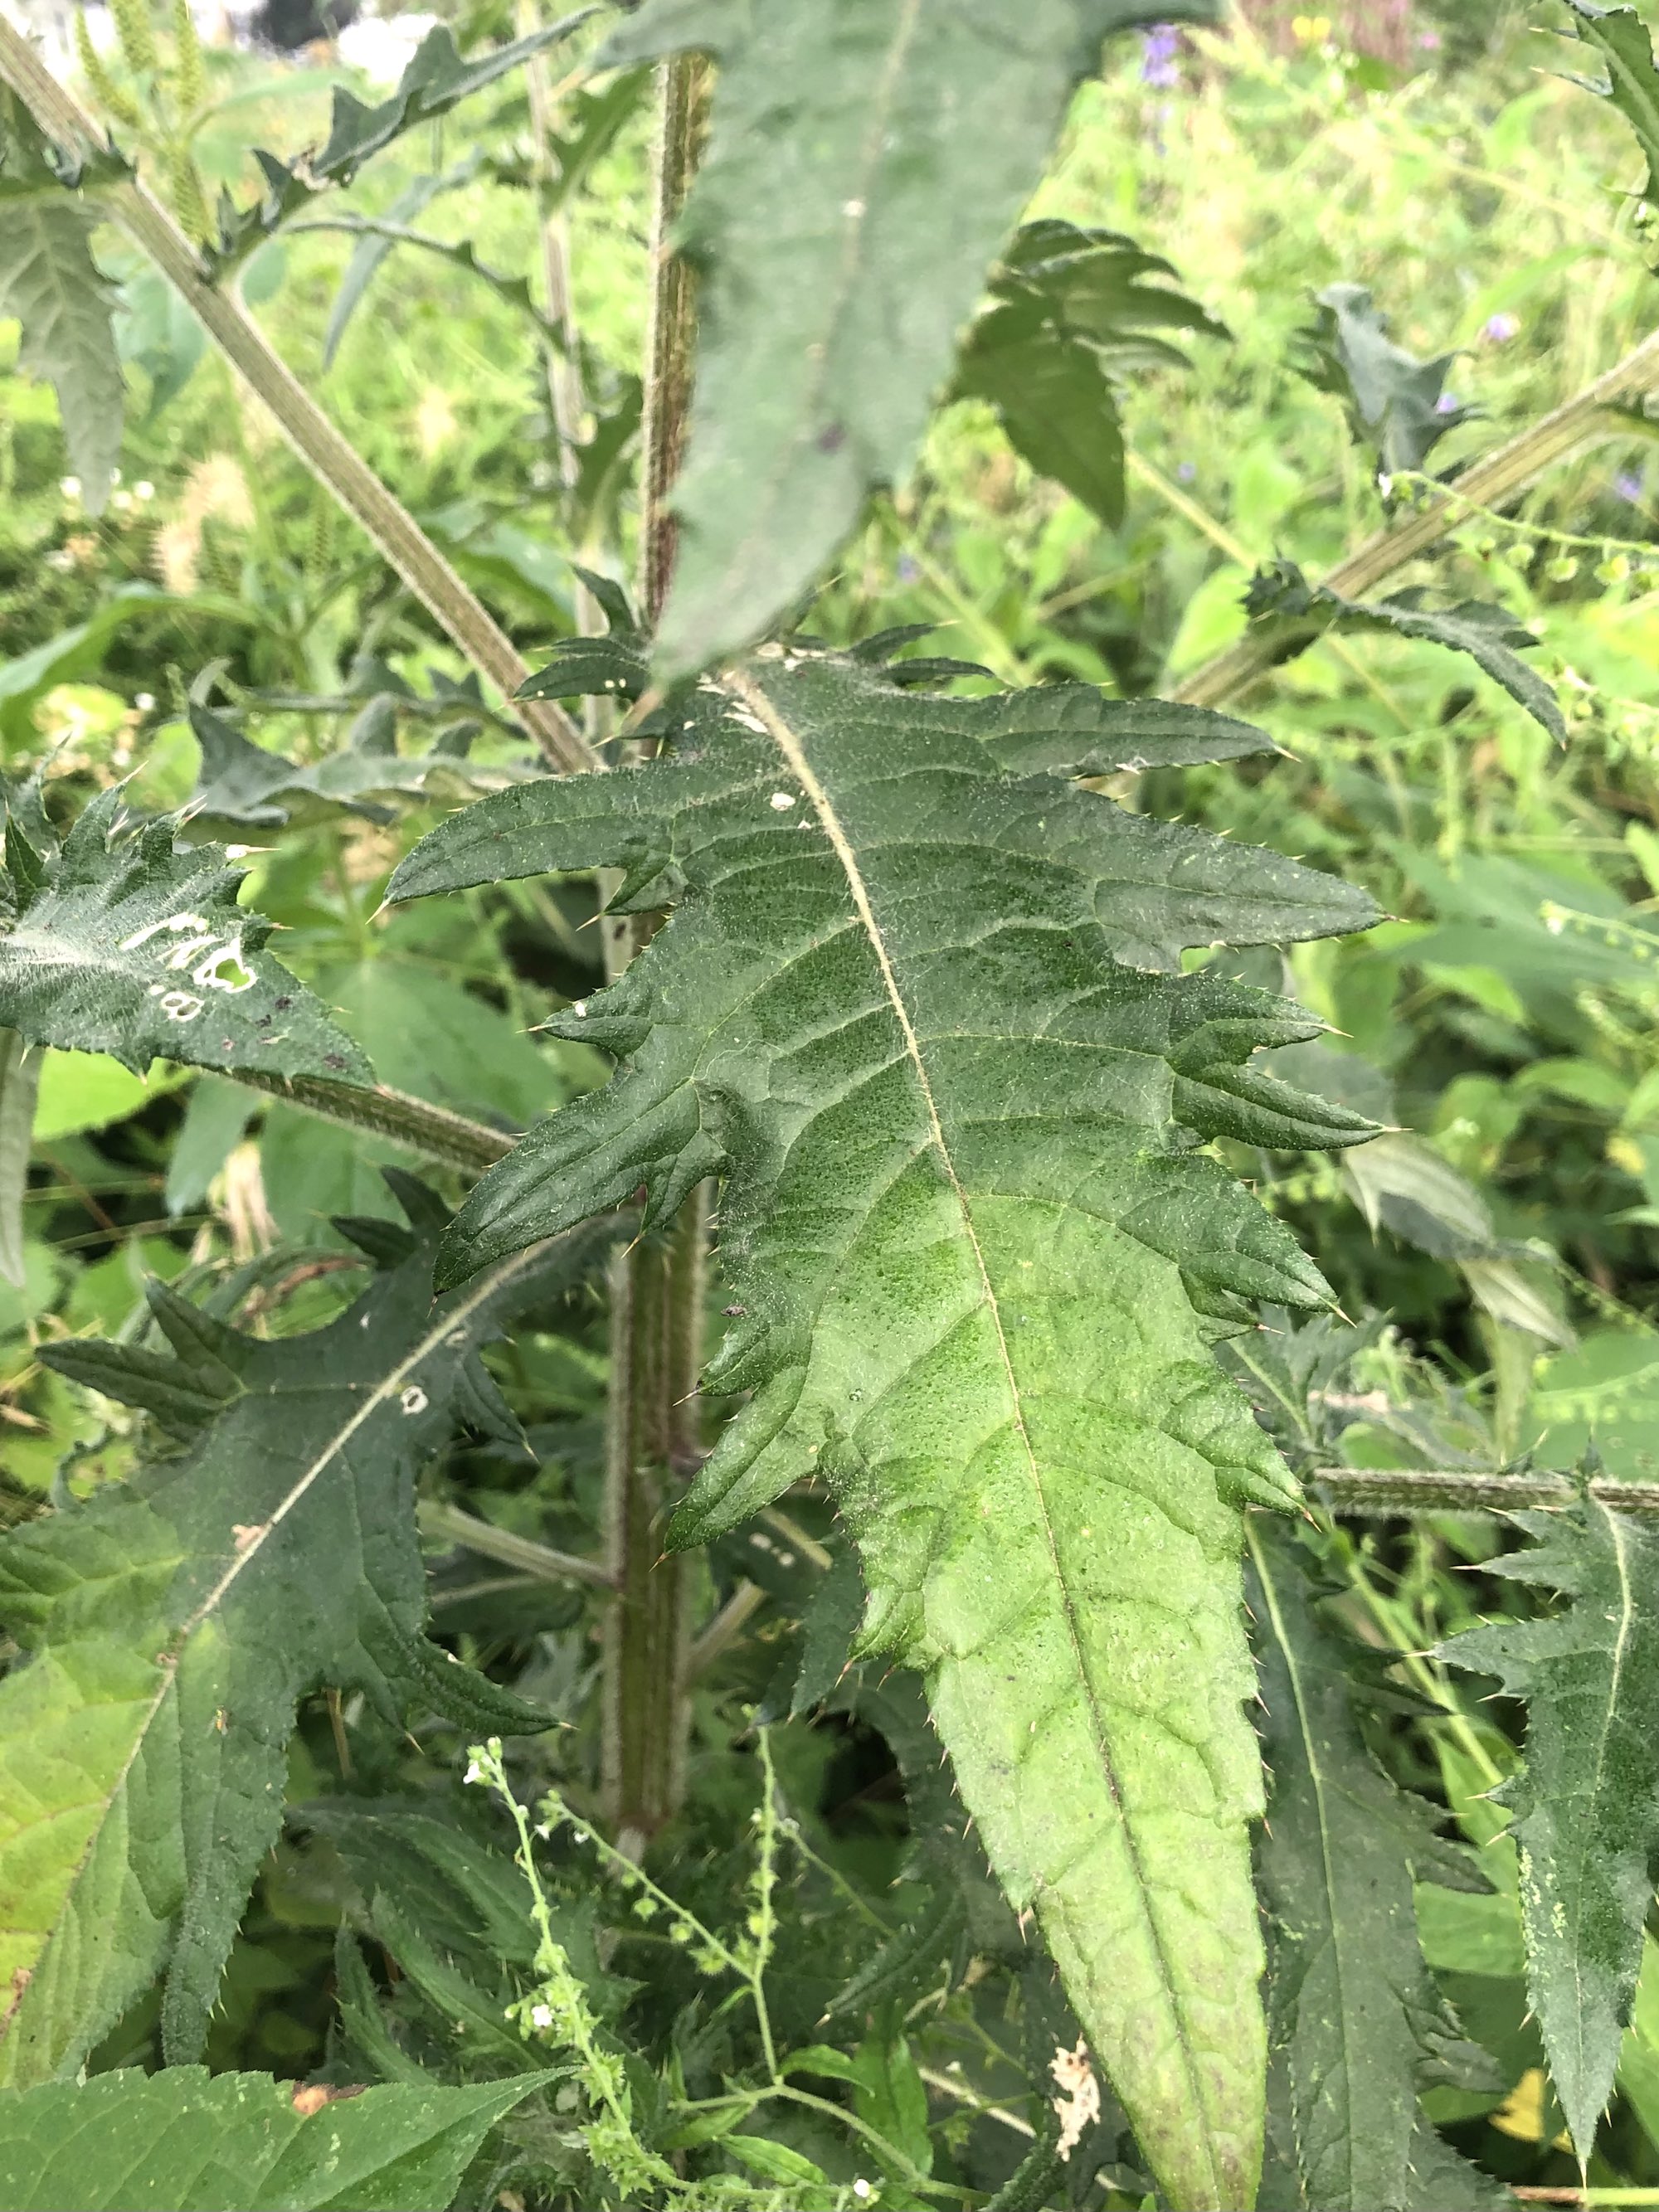 Tall Thistle stalk and leaves in Oak Savanna in Madison, Wisconsin on August 7, 2022.